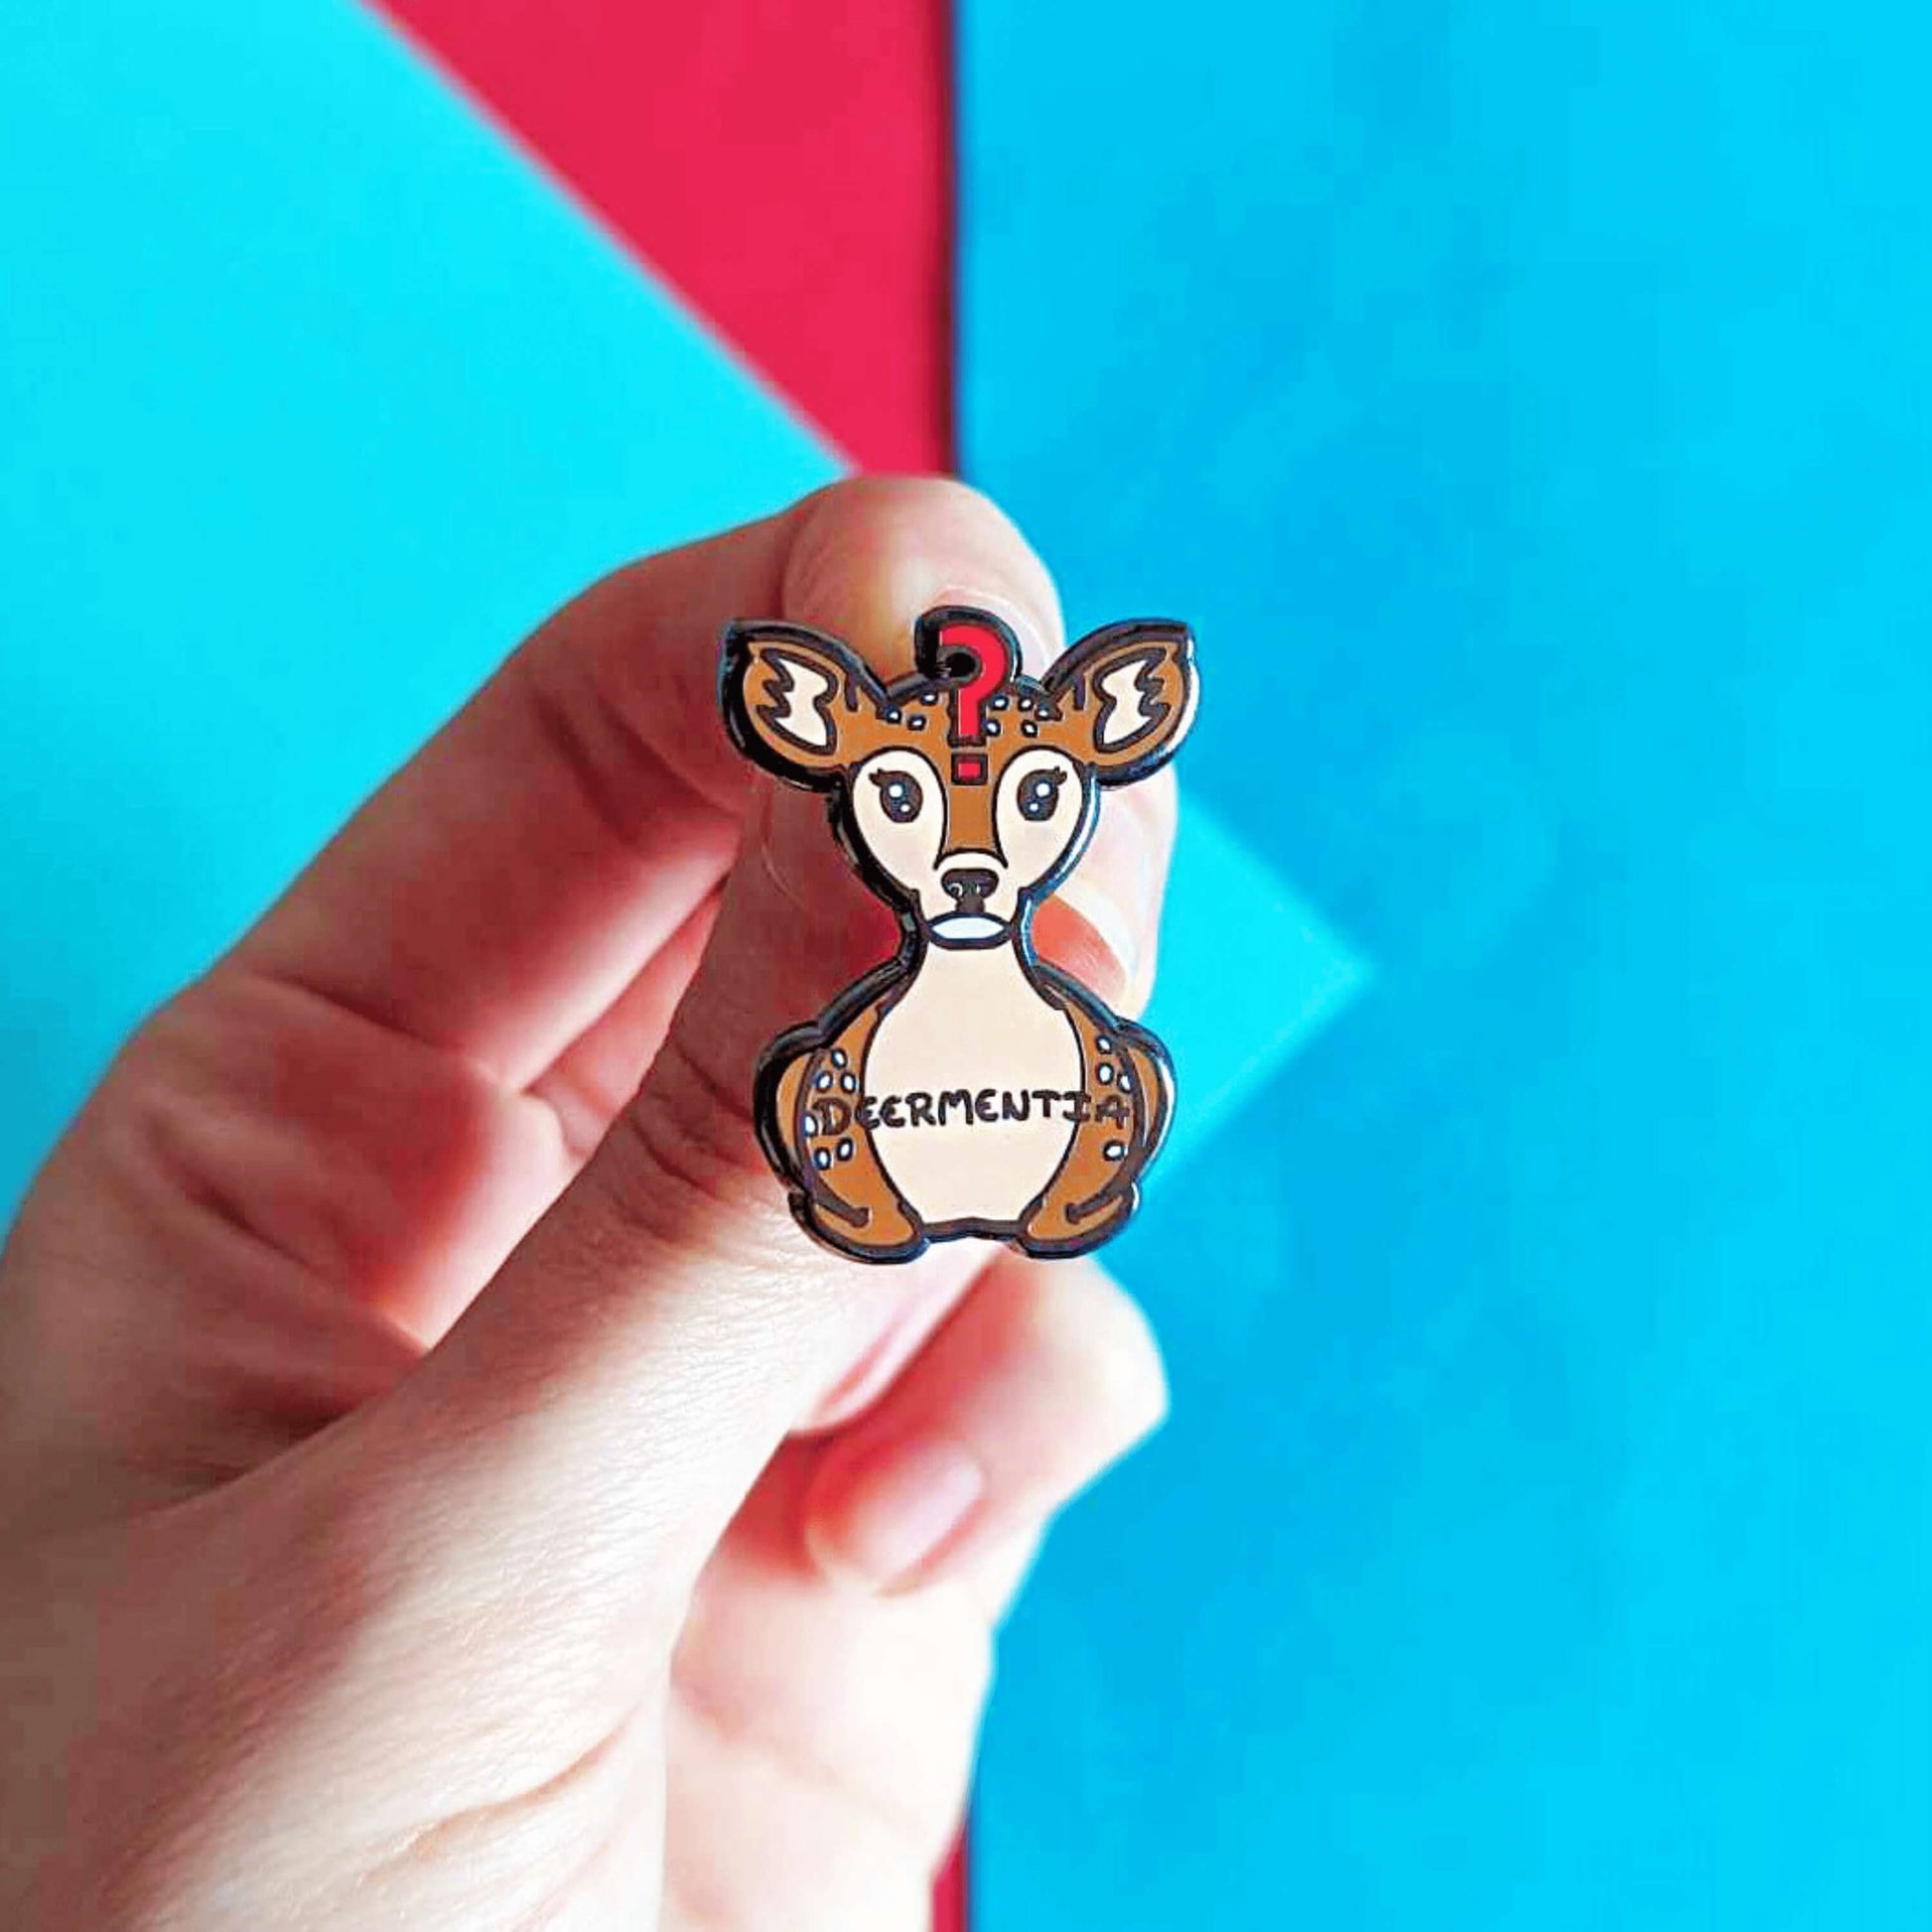 Hand holding Dementia enamel pin in front of red and blue background. A brown deer shaped enamel pin with long eyelashes, blank expression on it's face and red question mark in the middle of it's forehead. The deer has fluffy ears and white spots and is in a lying down straight on position. 'Deermentia' is written across the light brown tummy in black writing.